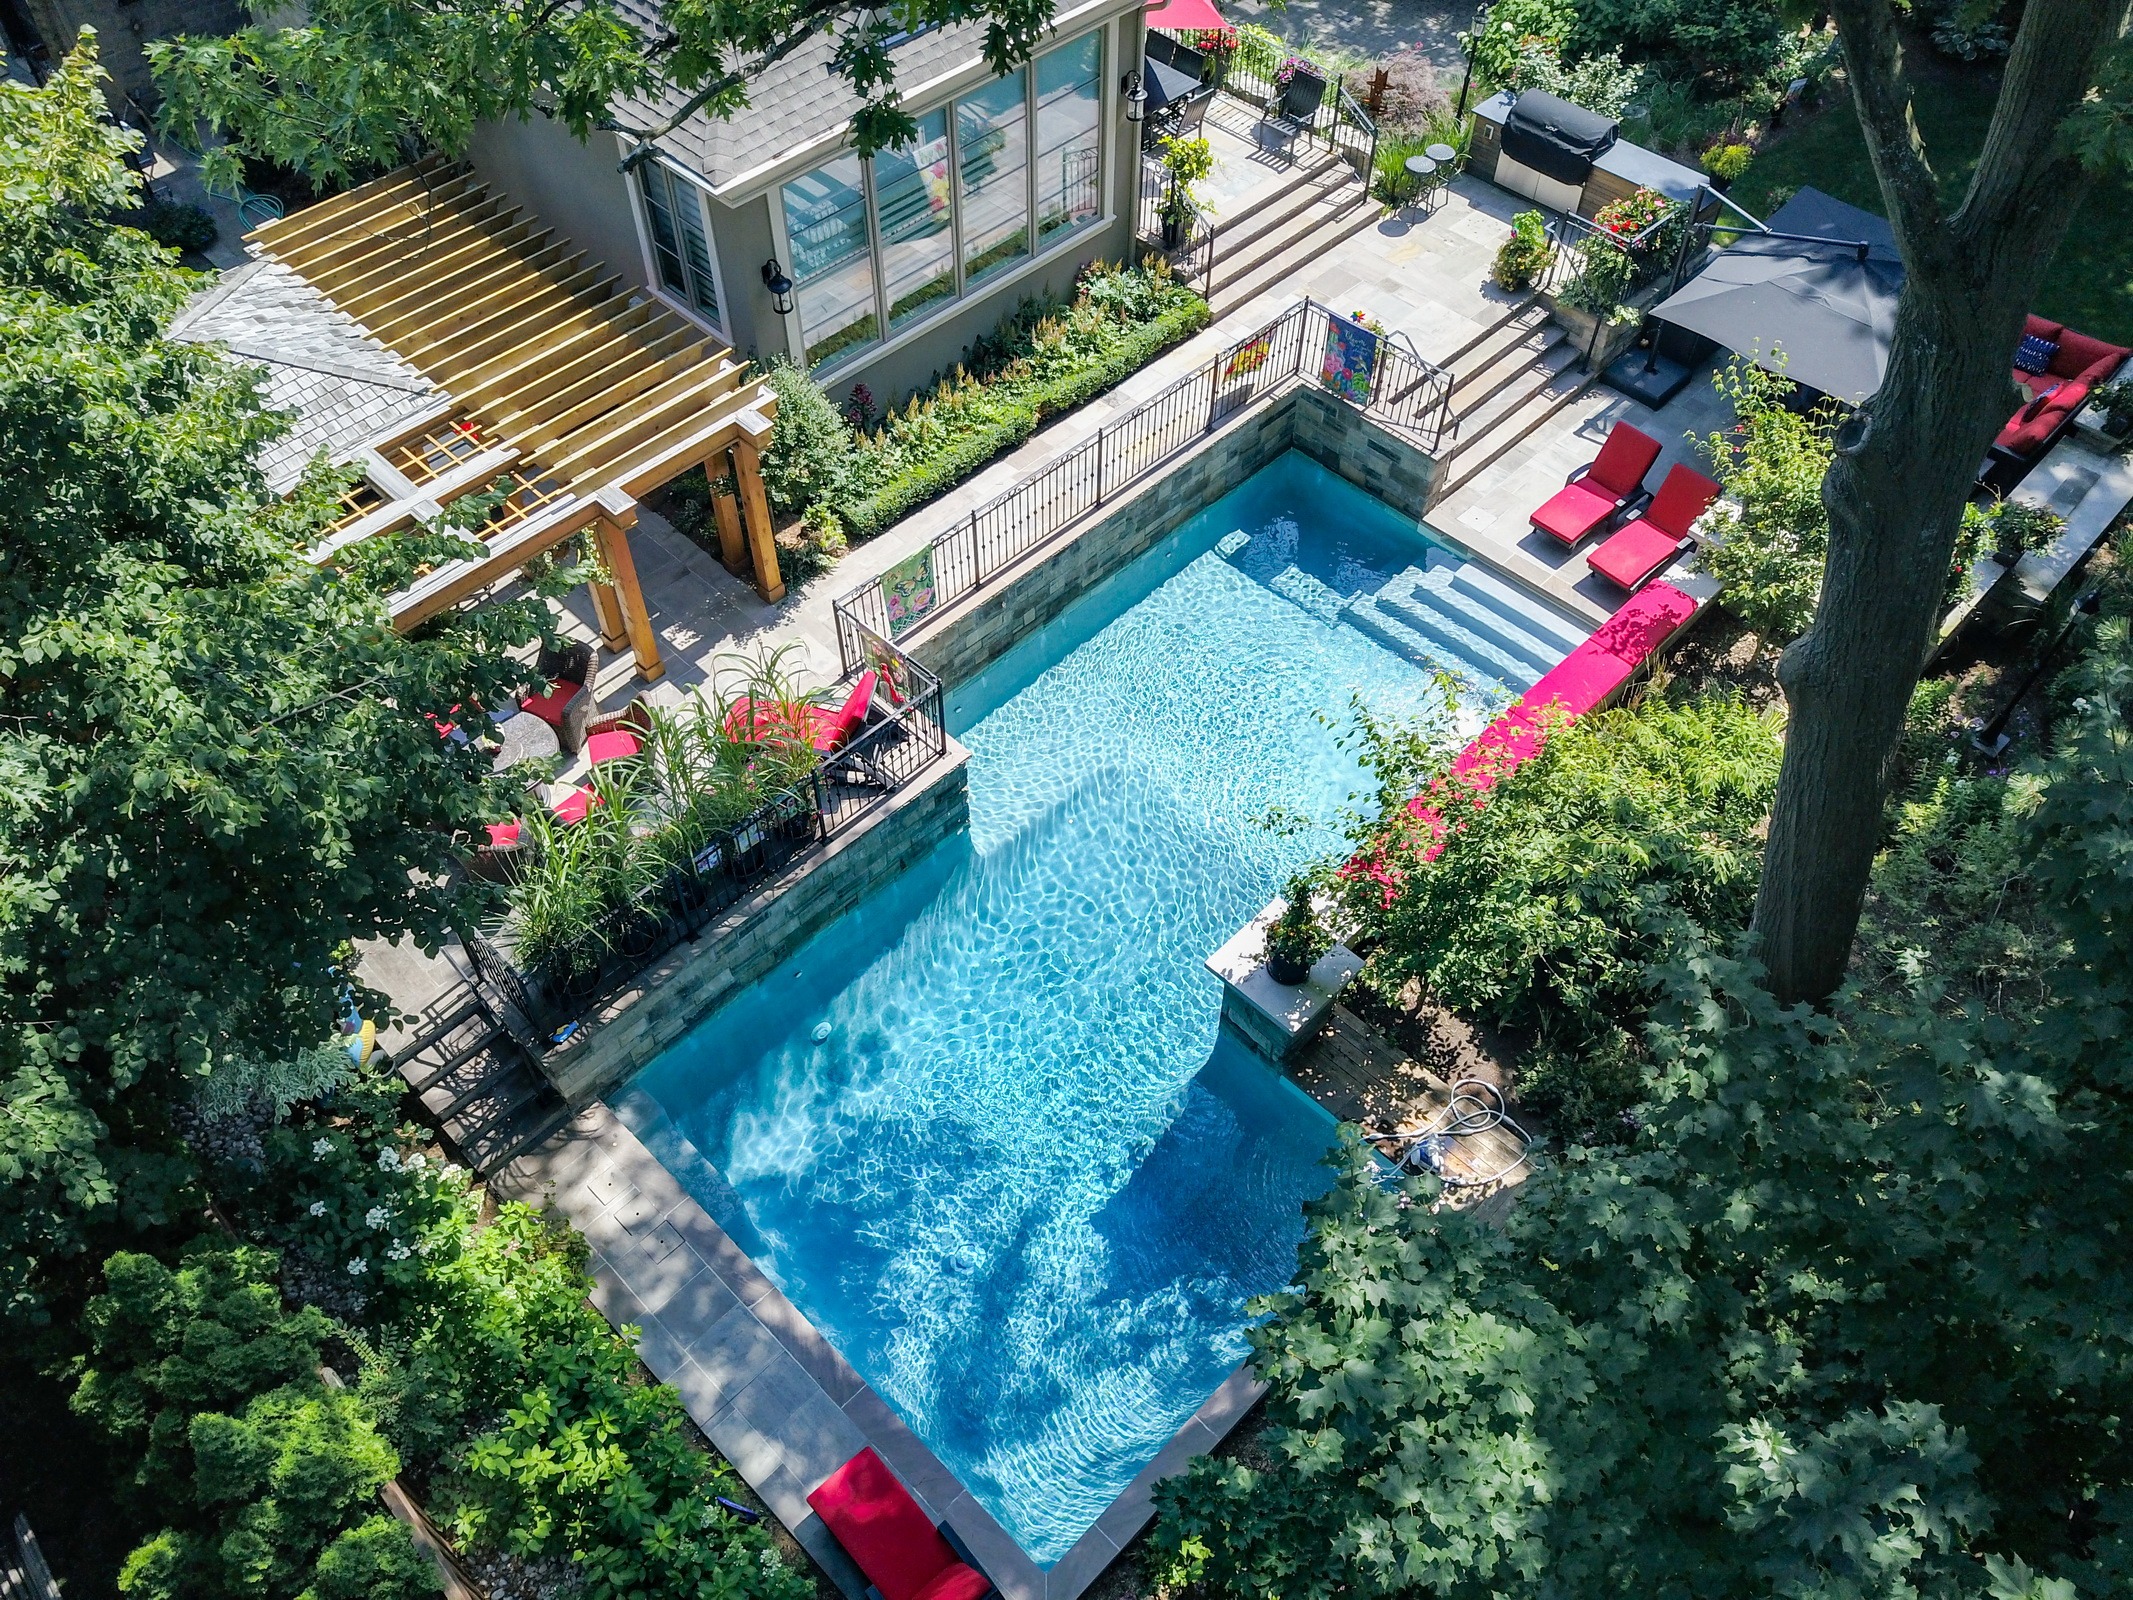 Aerial view of a backyard with a sparkling rectangular pool, patio area, sun loungers, pergola, dining set, and lush greenery surrounding the space.